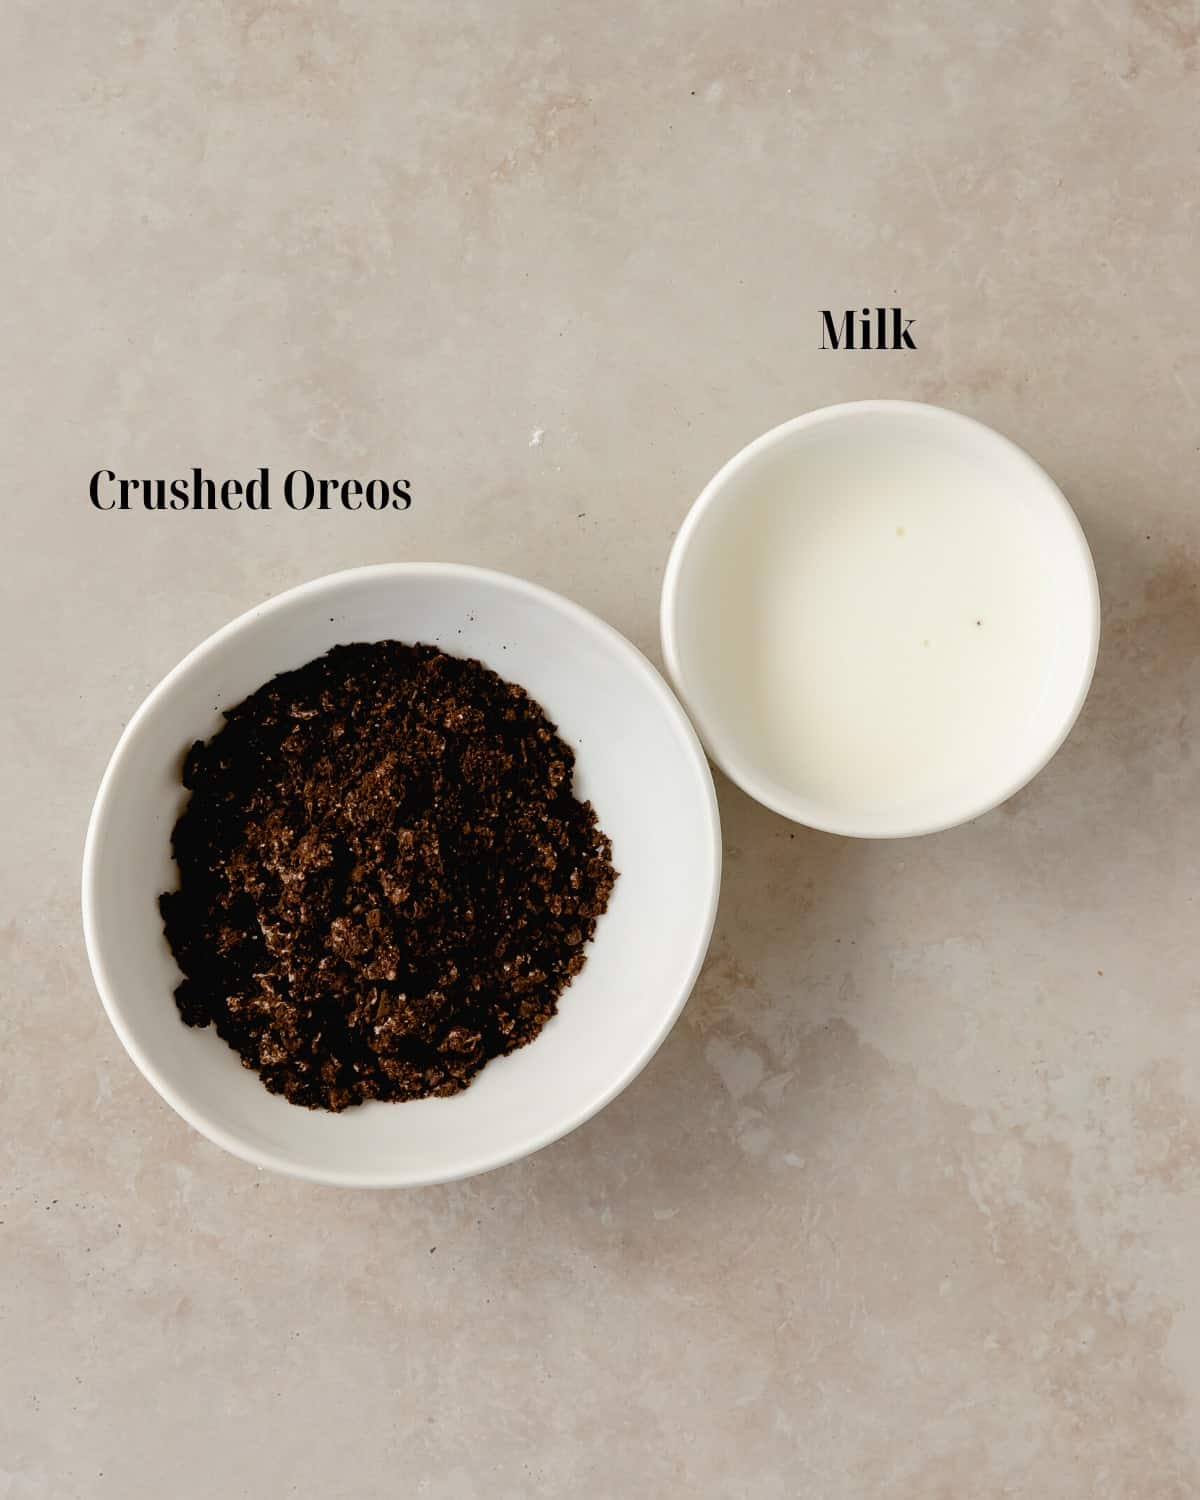 Gather crushed Oreo cookies and milk. 